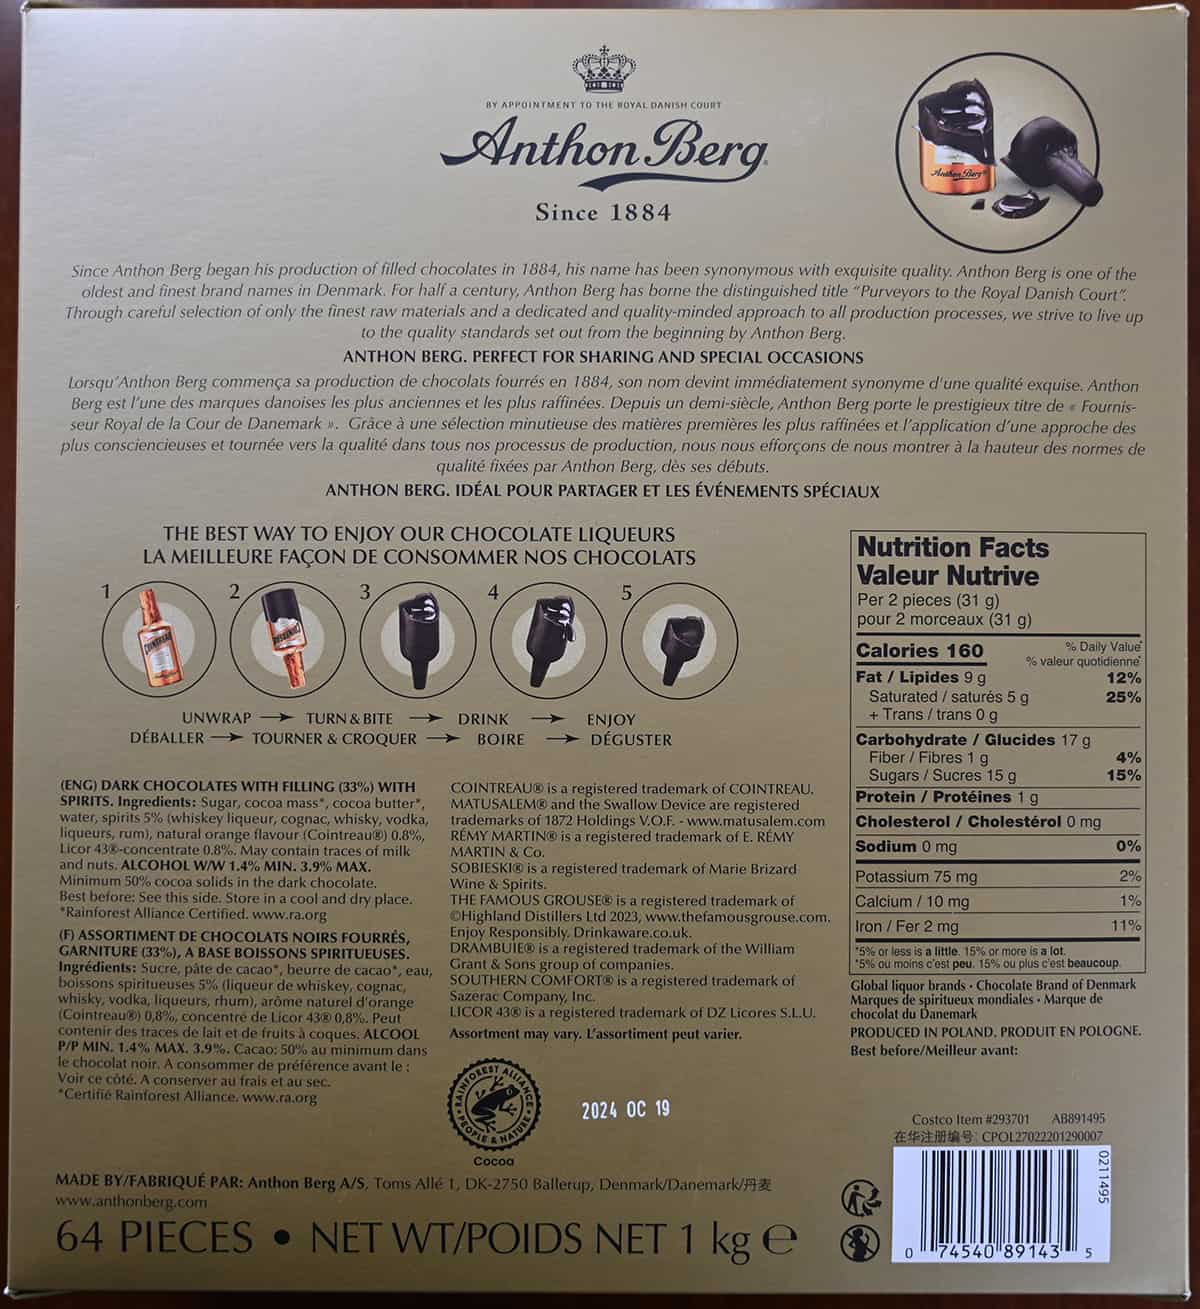 Image of the back of the box of the chocolates showing ingredients, nutrition facts, expiry date and product description.